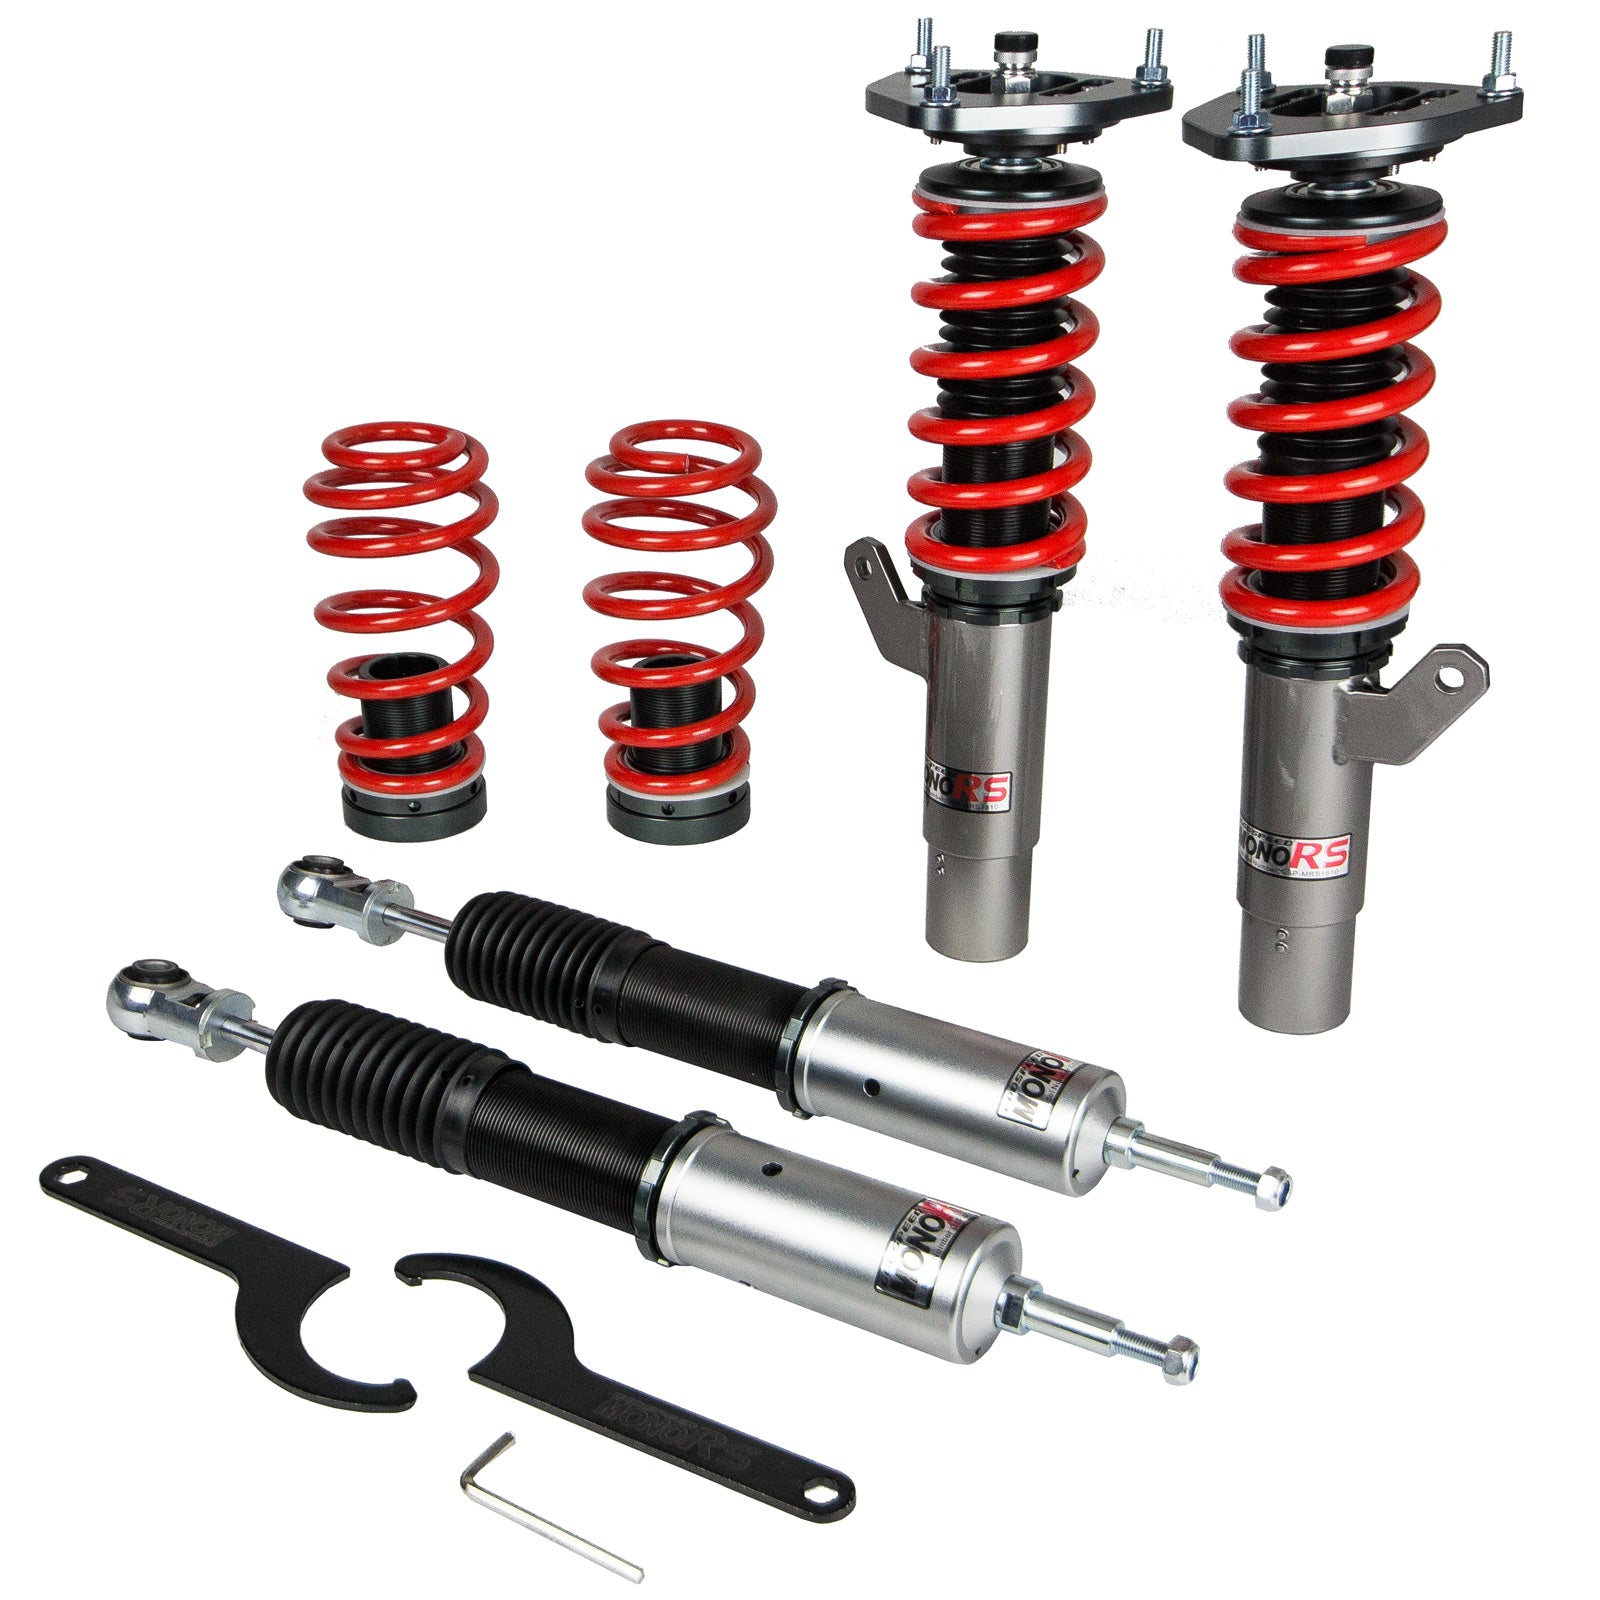 Godspeed MRS1810-C MonoRS Coilover Lowering Kit, 32 Damping Adjustment, Ride Height Adjustable